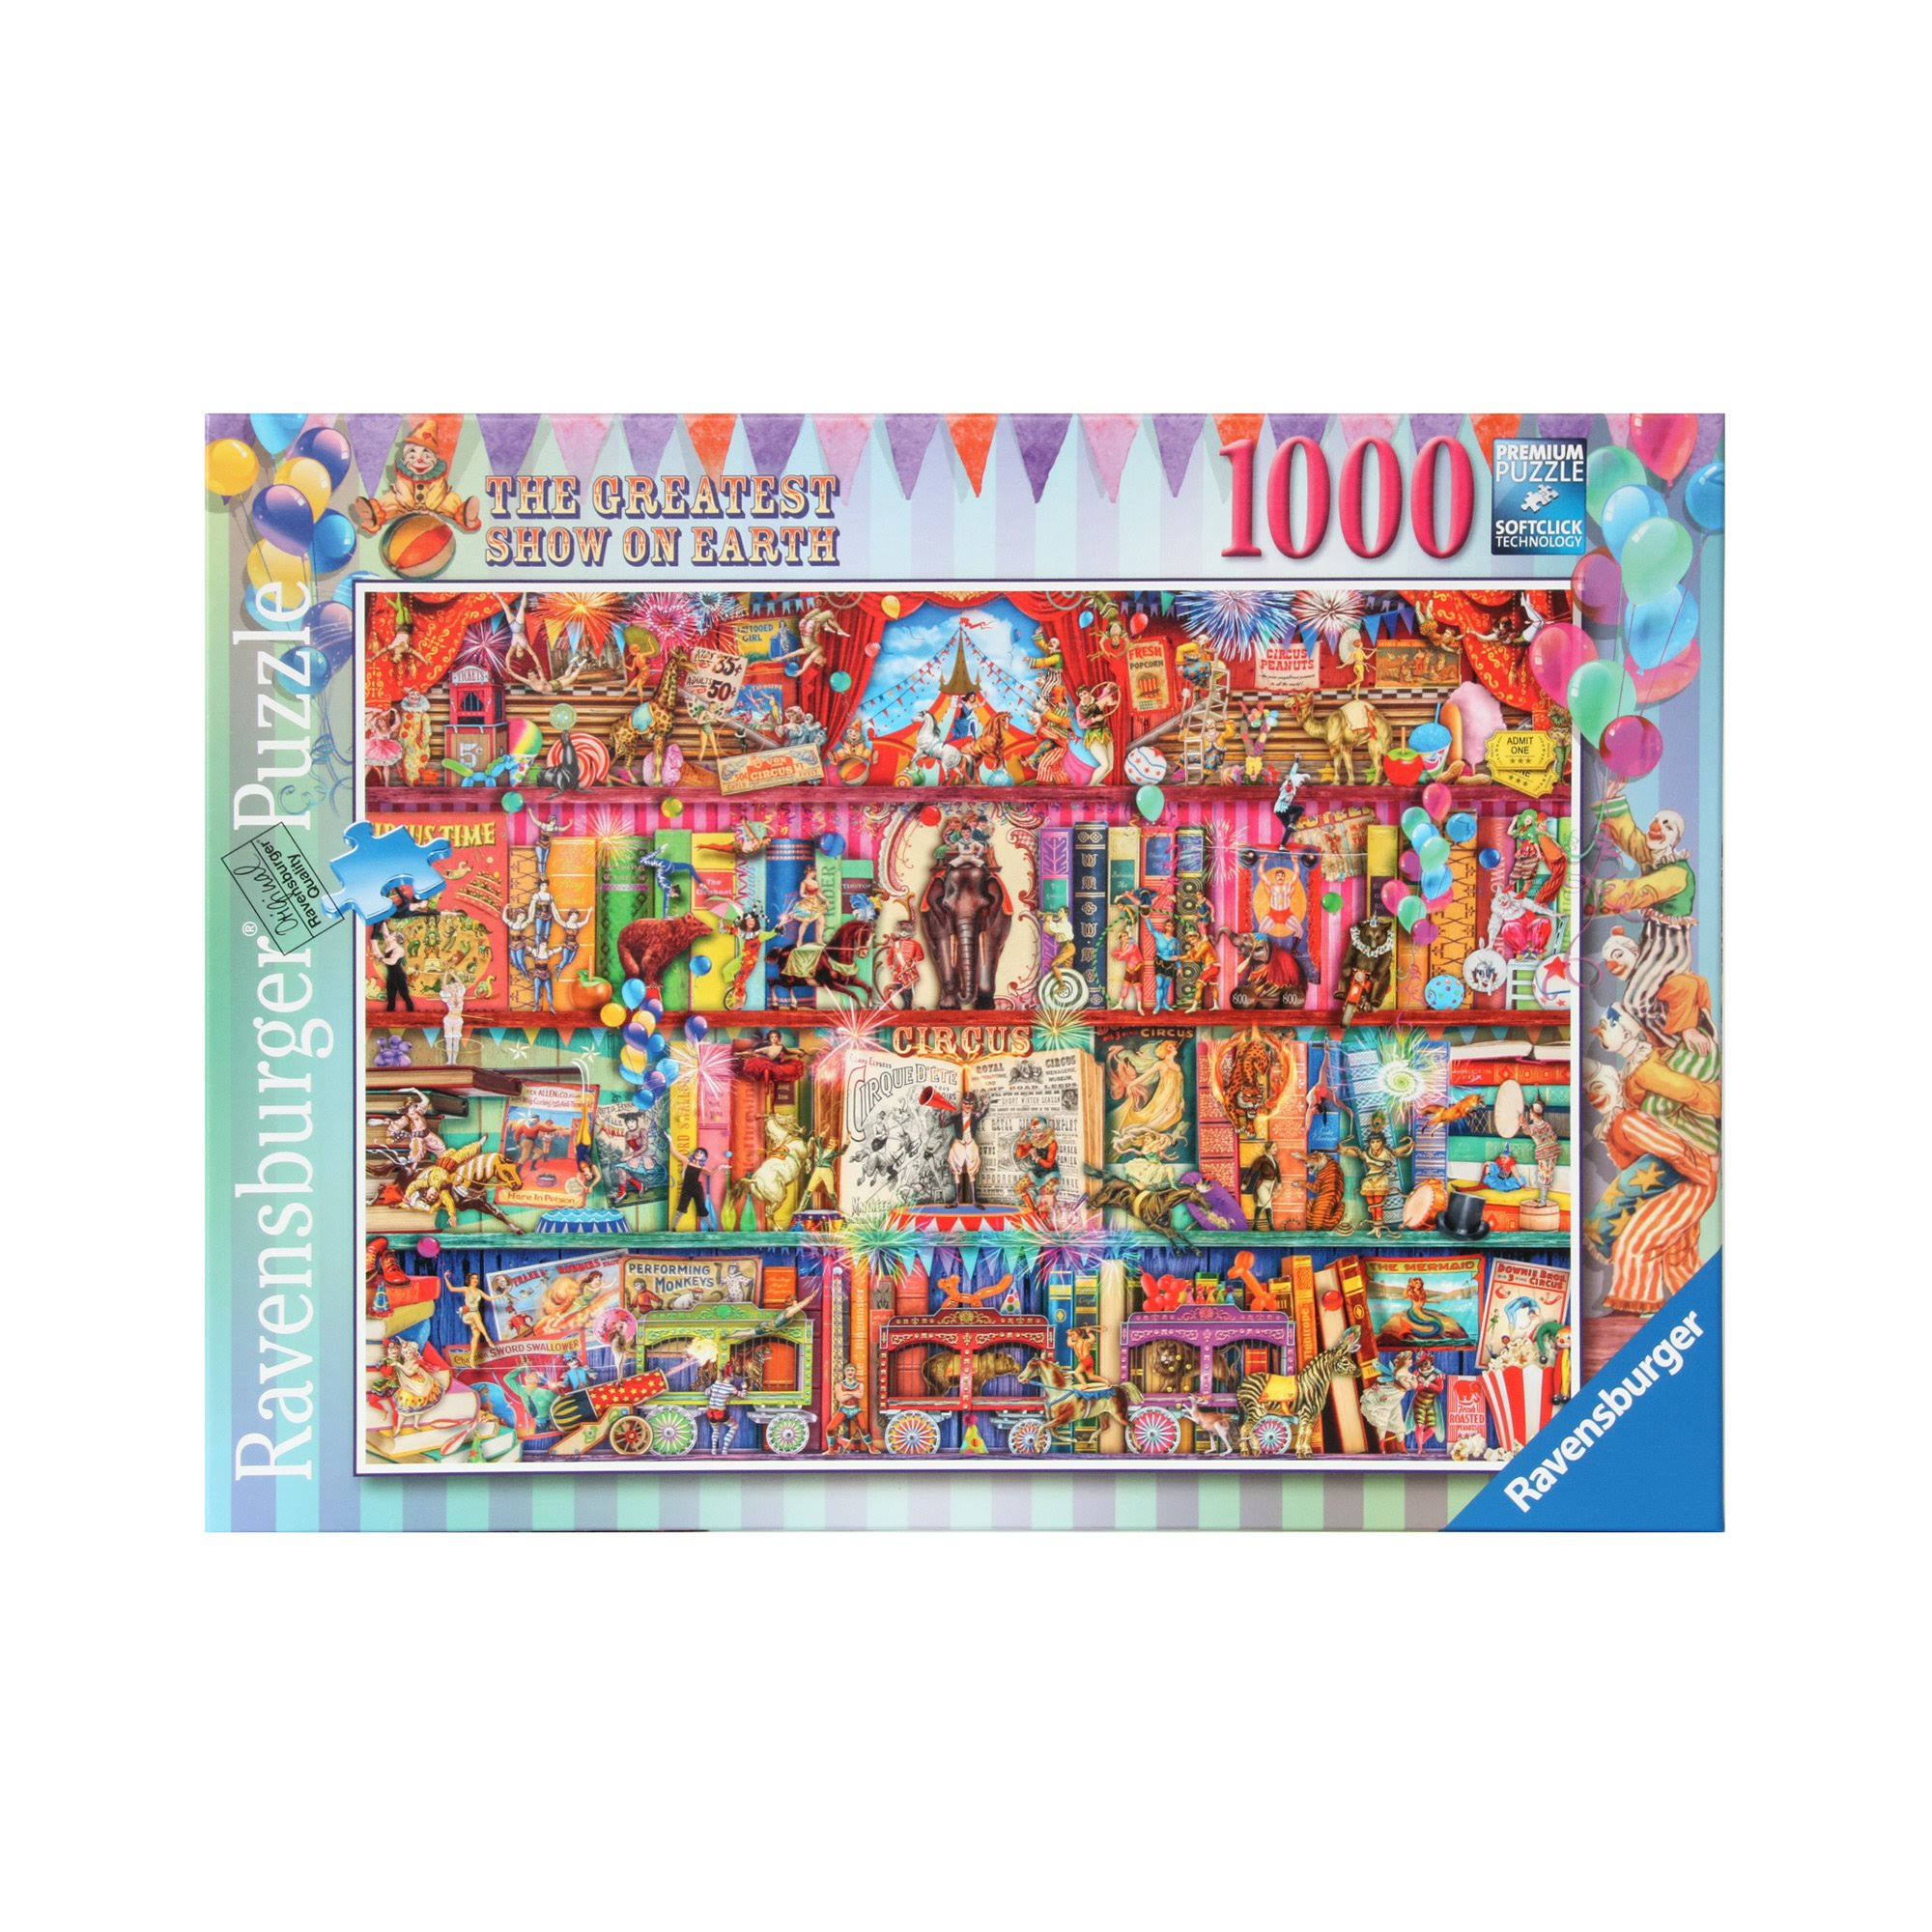 Ravensburger 15254 The Greatest Show on Earth Jigsaw Puzzle - 1000pcs